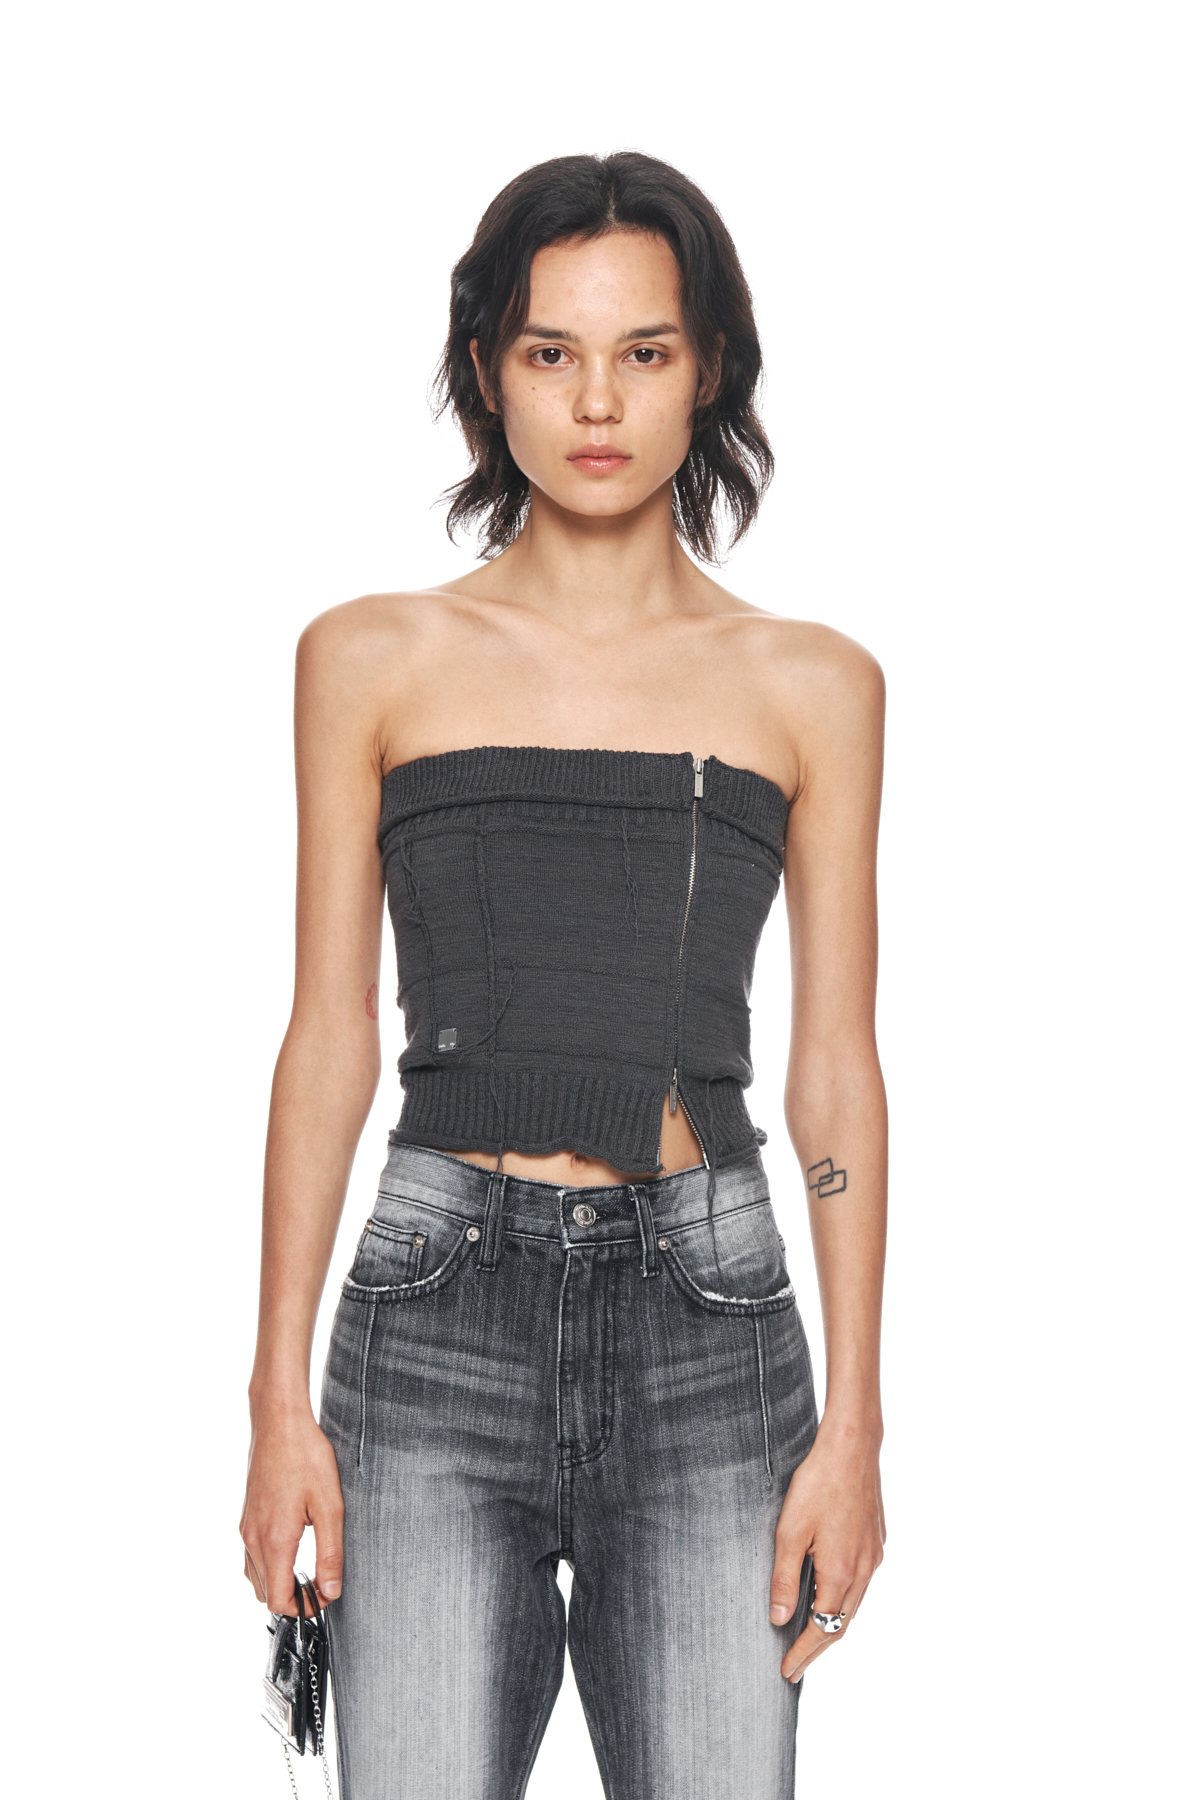 NATURAL DAMAGE ZIP UP TUBE TOP IN CHARCOAL